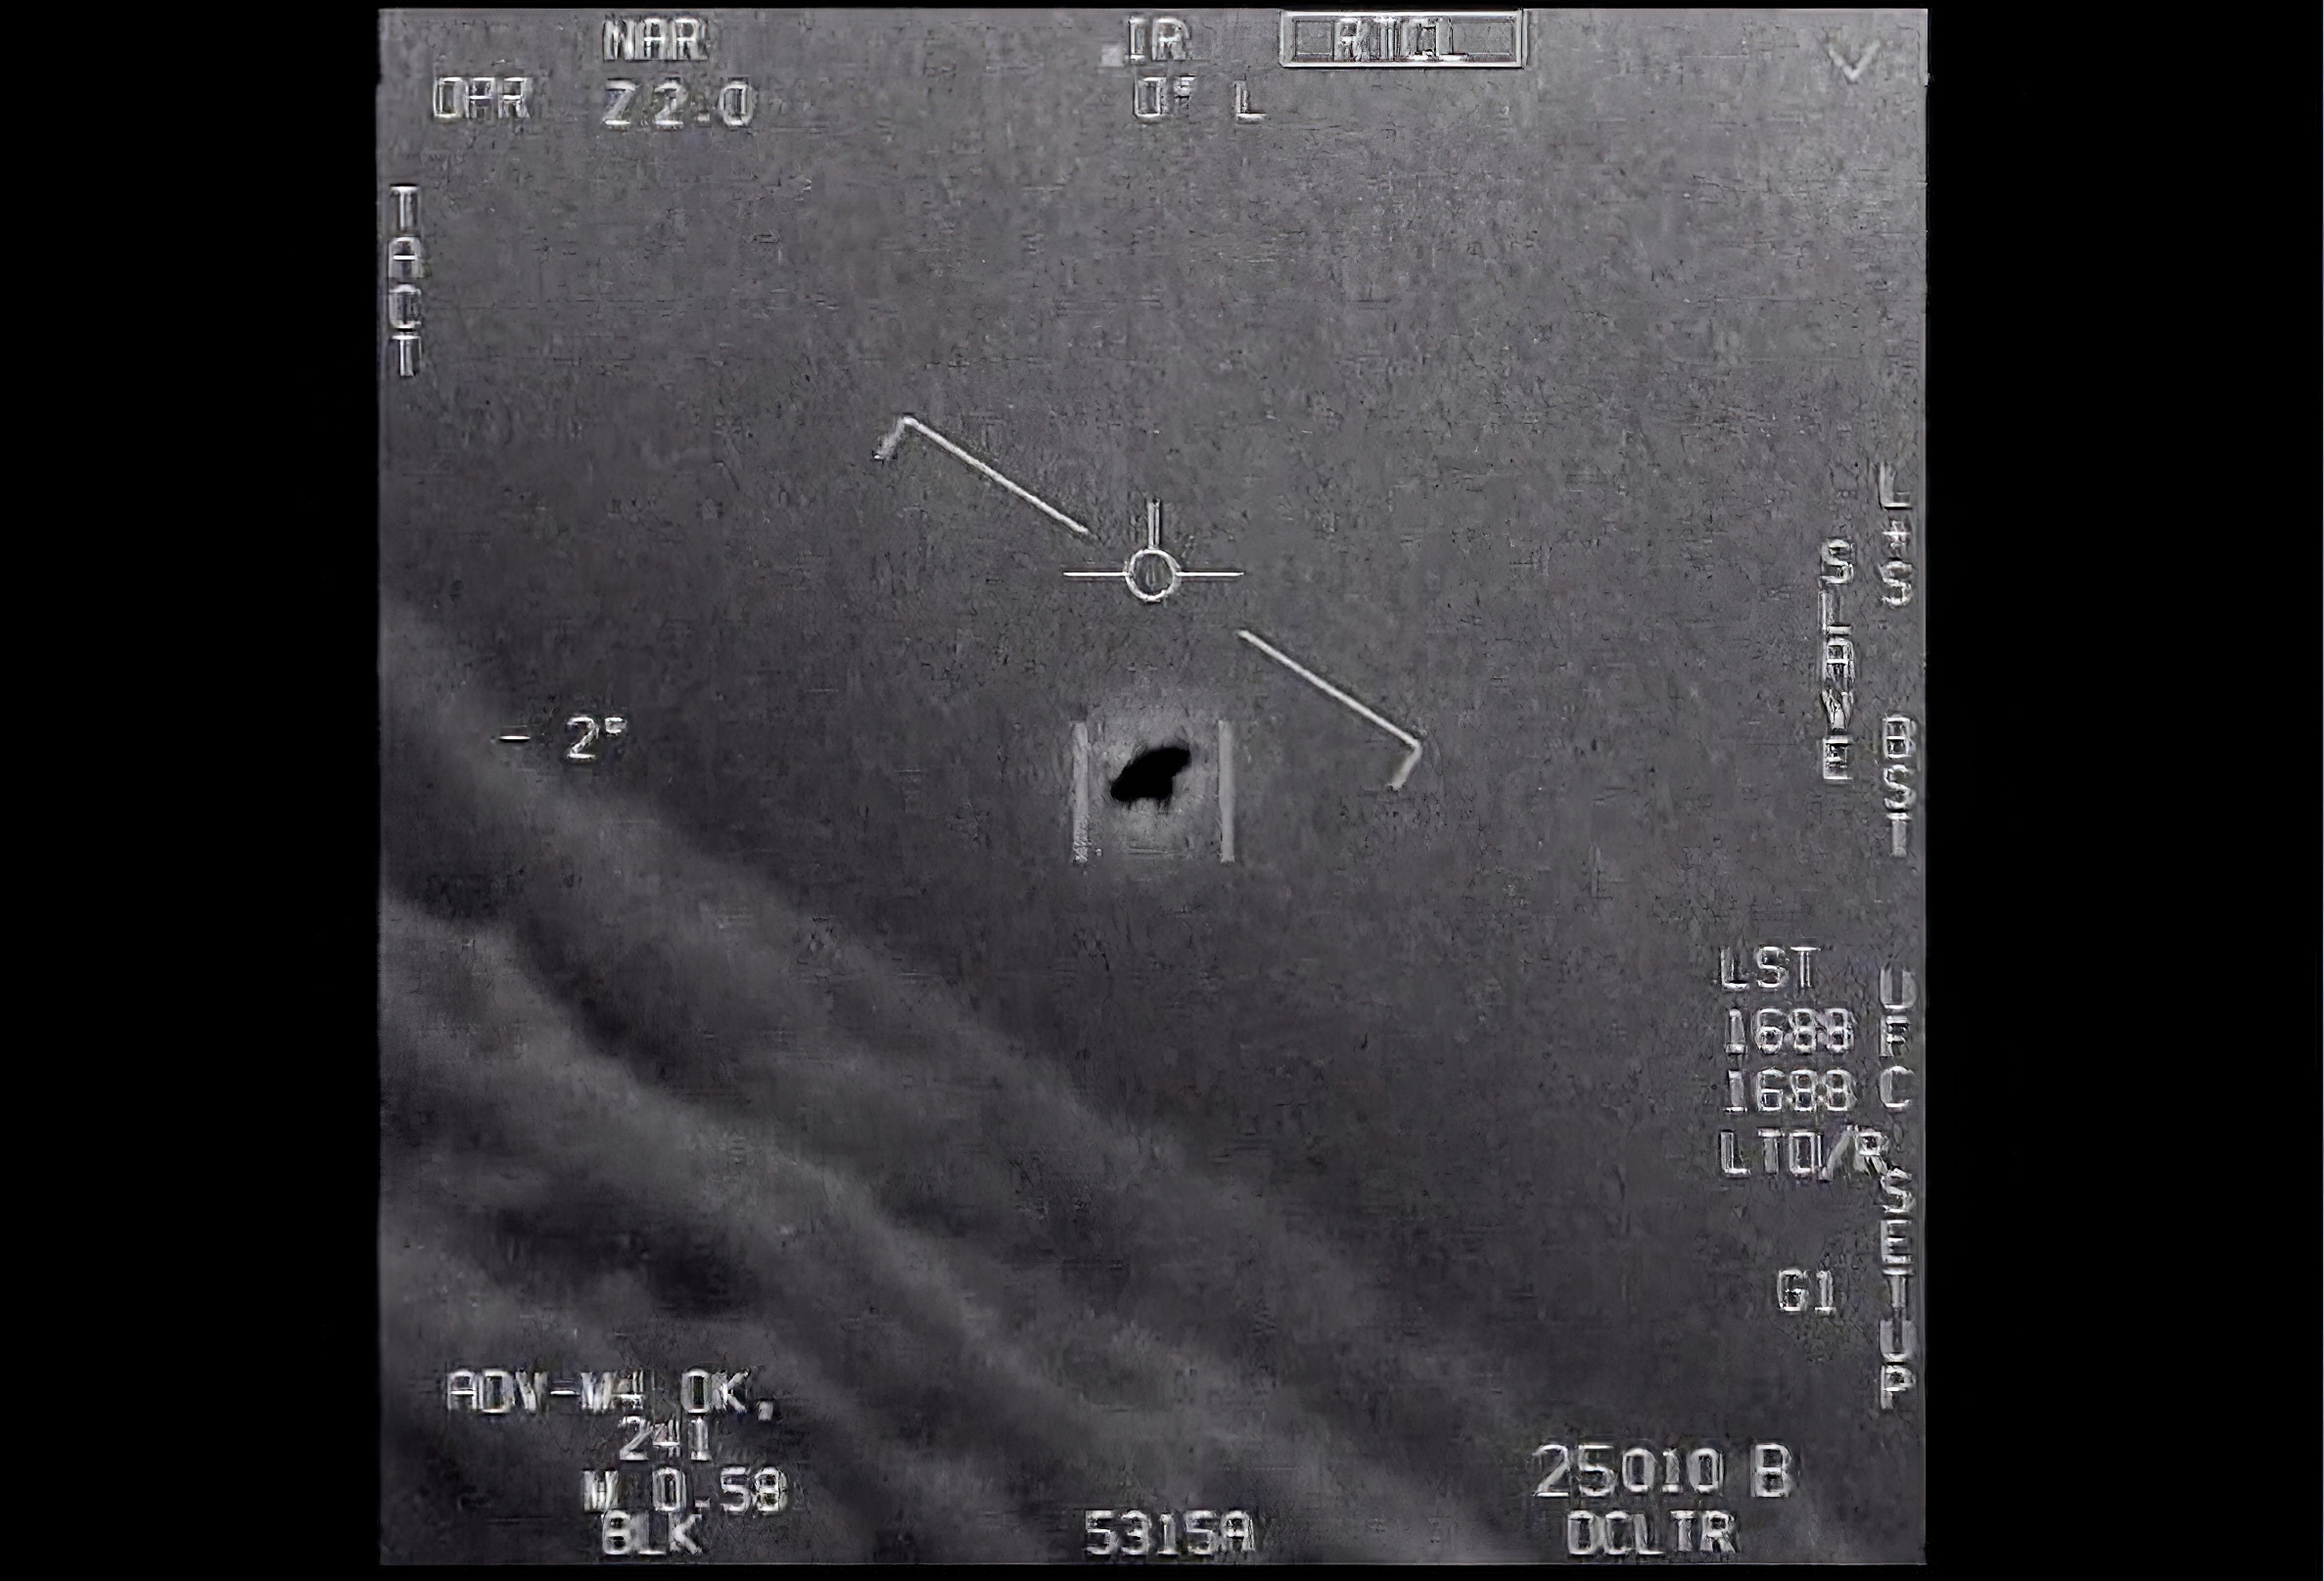 Pentagon Receives More Than 350 New Reports of UFO Sightings